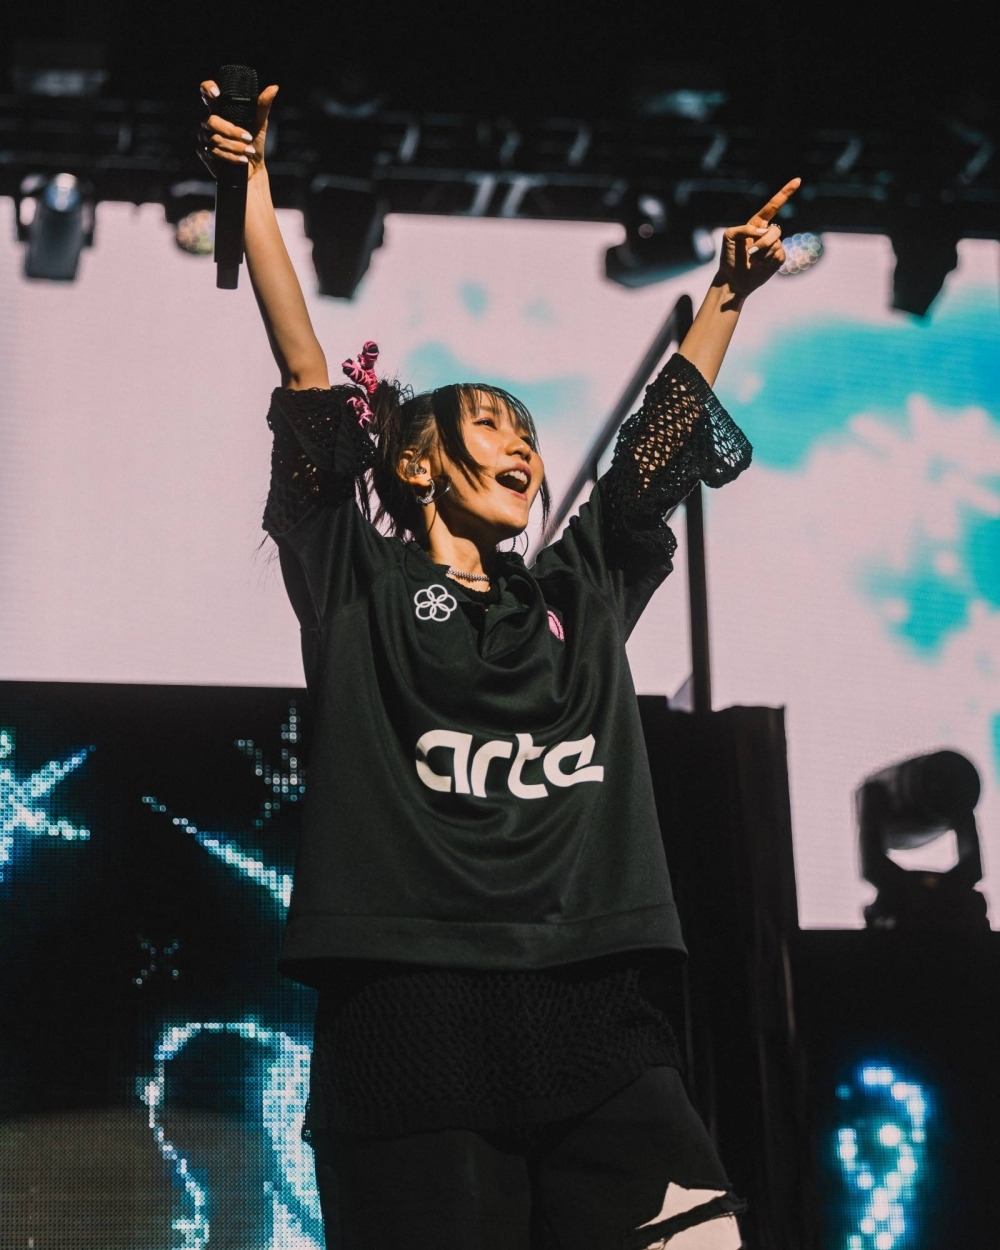 Yoasobi vocalist Lilas Ikuta, who goes by “Ikura,” and bandmate Ayase performed a solo set Friday night and appeared a second time as part of the American company 88Rising’s showcase Sunday at Coachella Valley Music and Arts Festival in Indio, California.